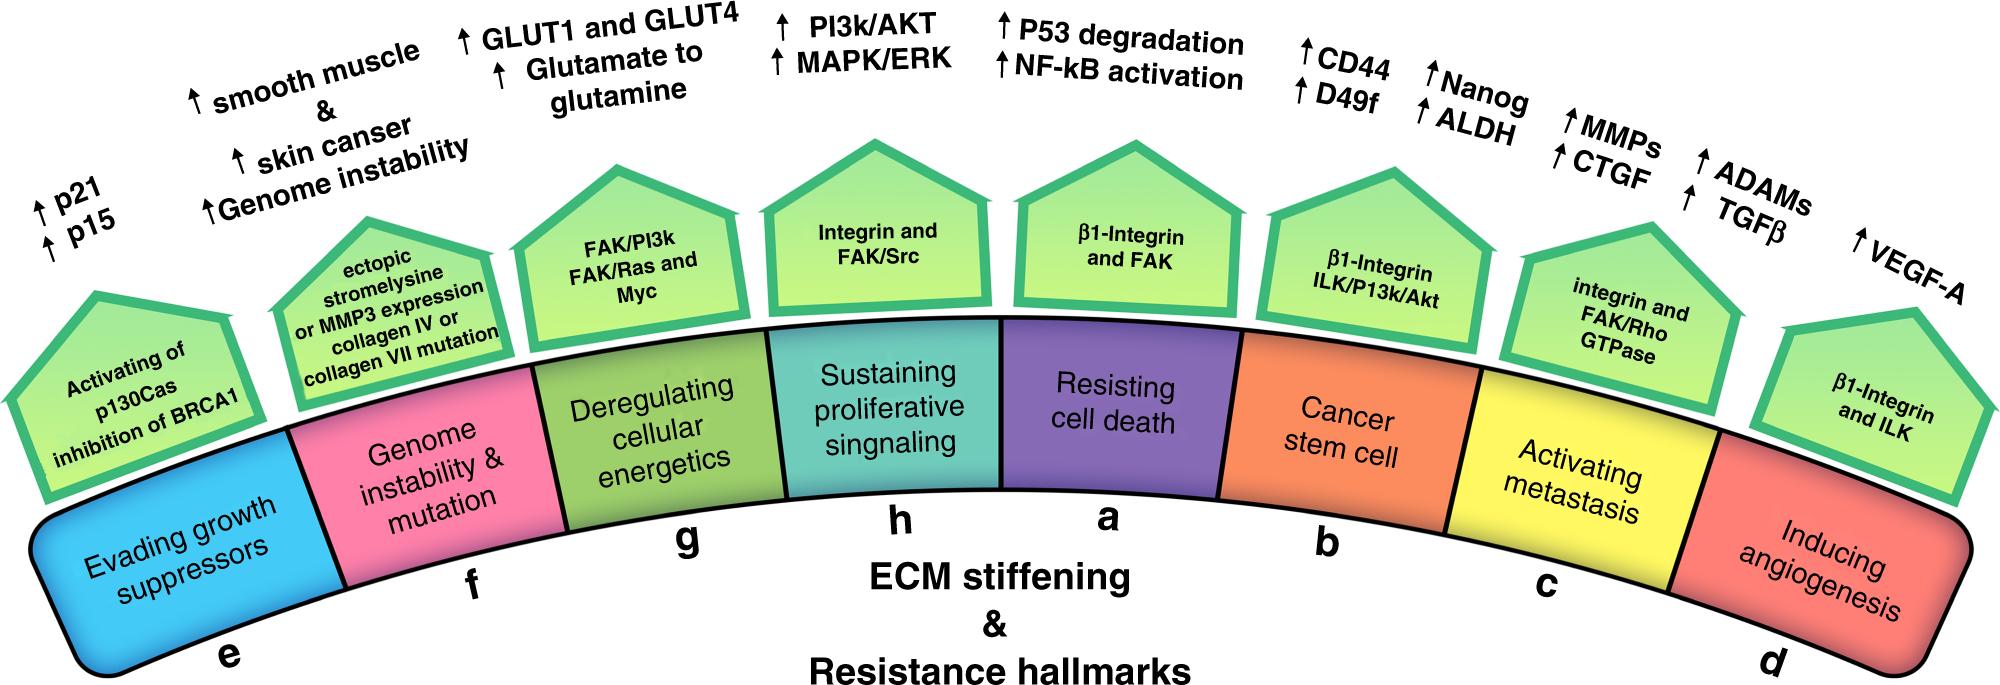 Matrix stiffening and acquired resistance to chemotherapy: concepts and  clinical significance | British Journal of Cancer